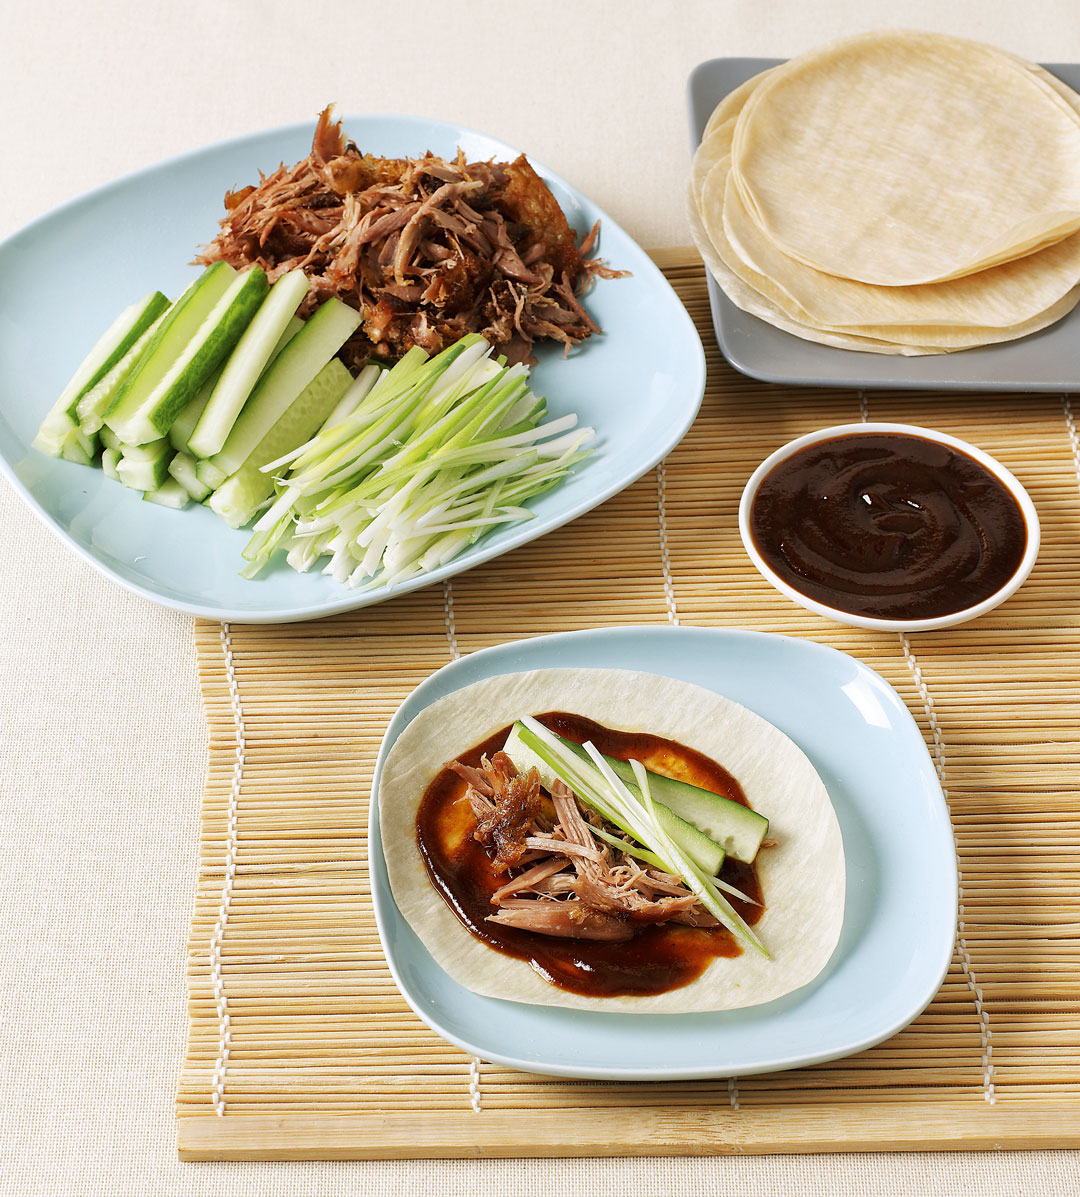 Crispy duck pancakes, from Simple & Classic by Jane Hornby